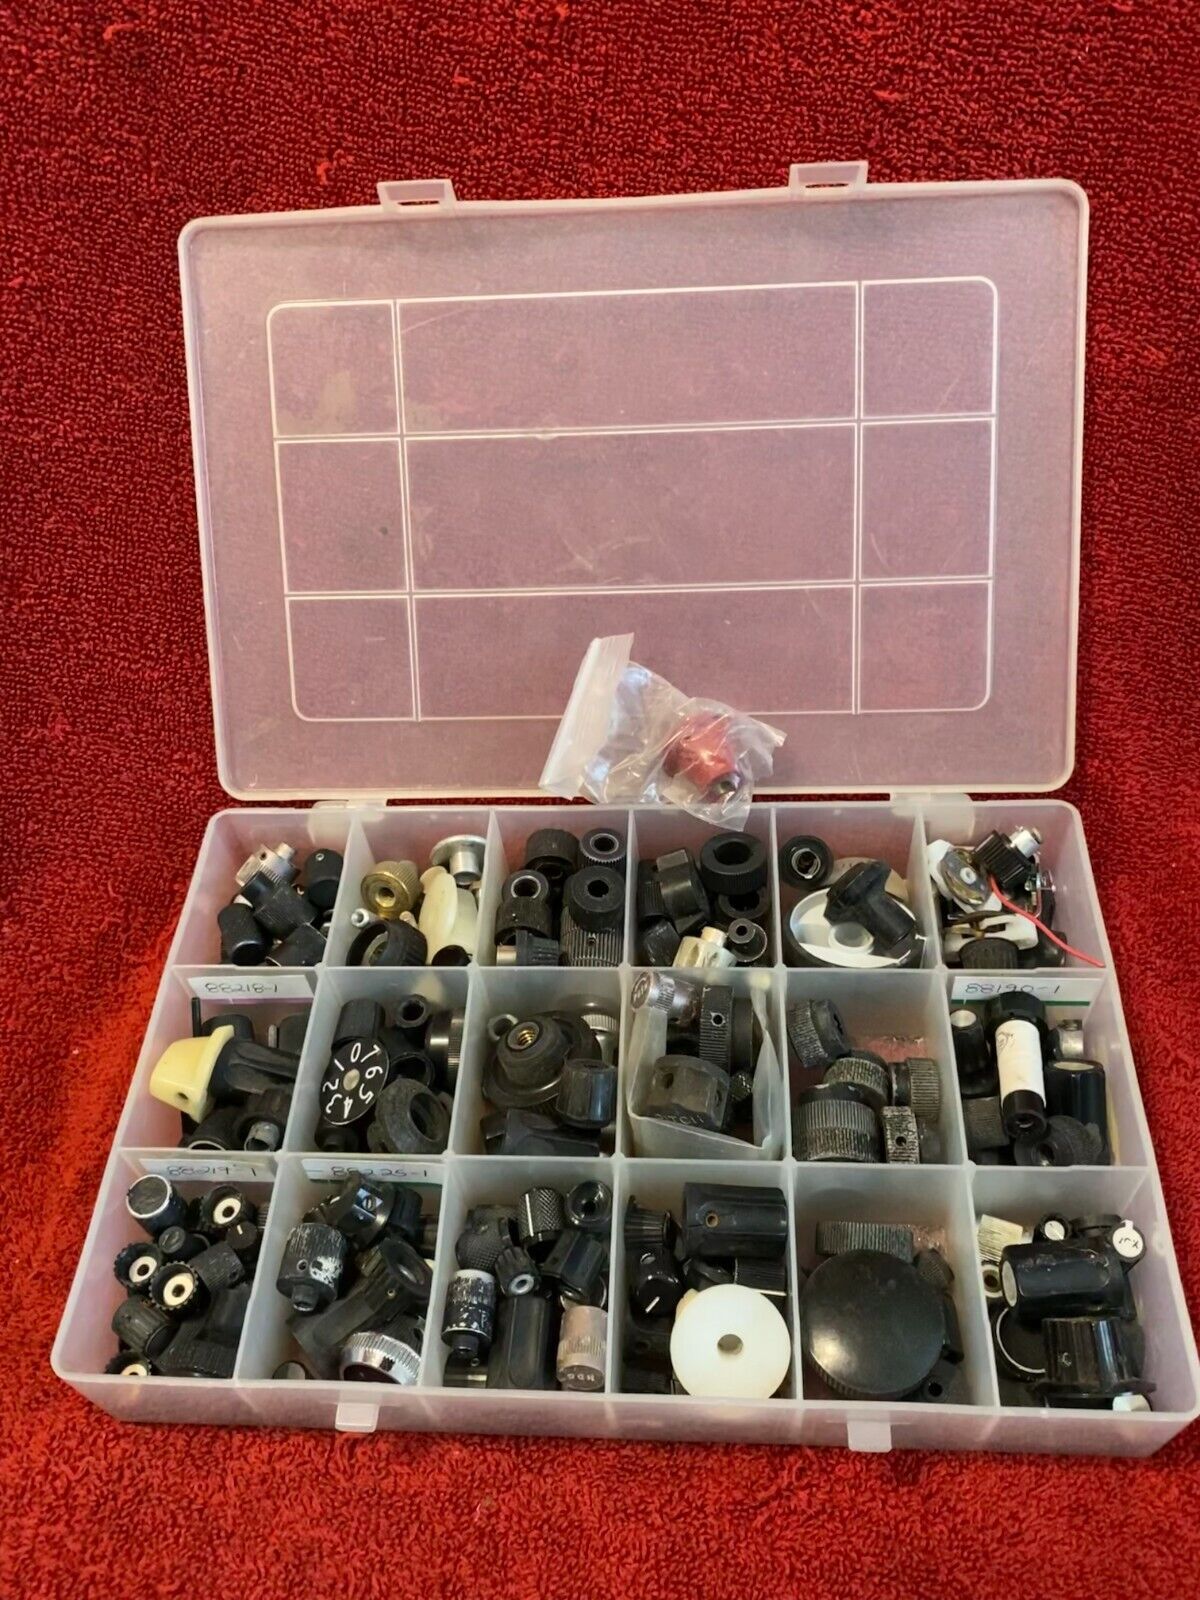 LOT OF AVIONICS KNOBS VARIED SIZES AND SHAPES IN ORGANIZER